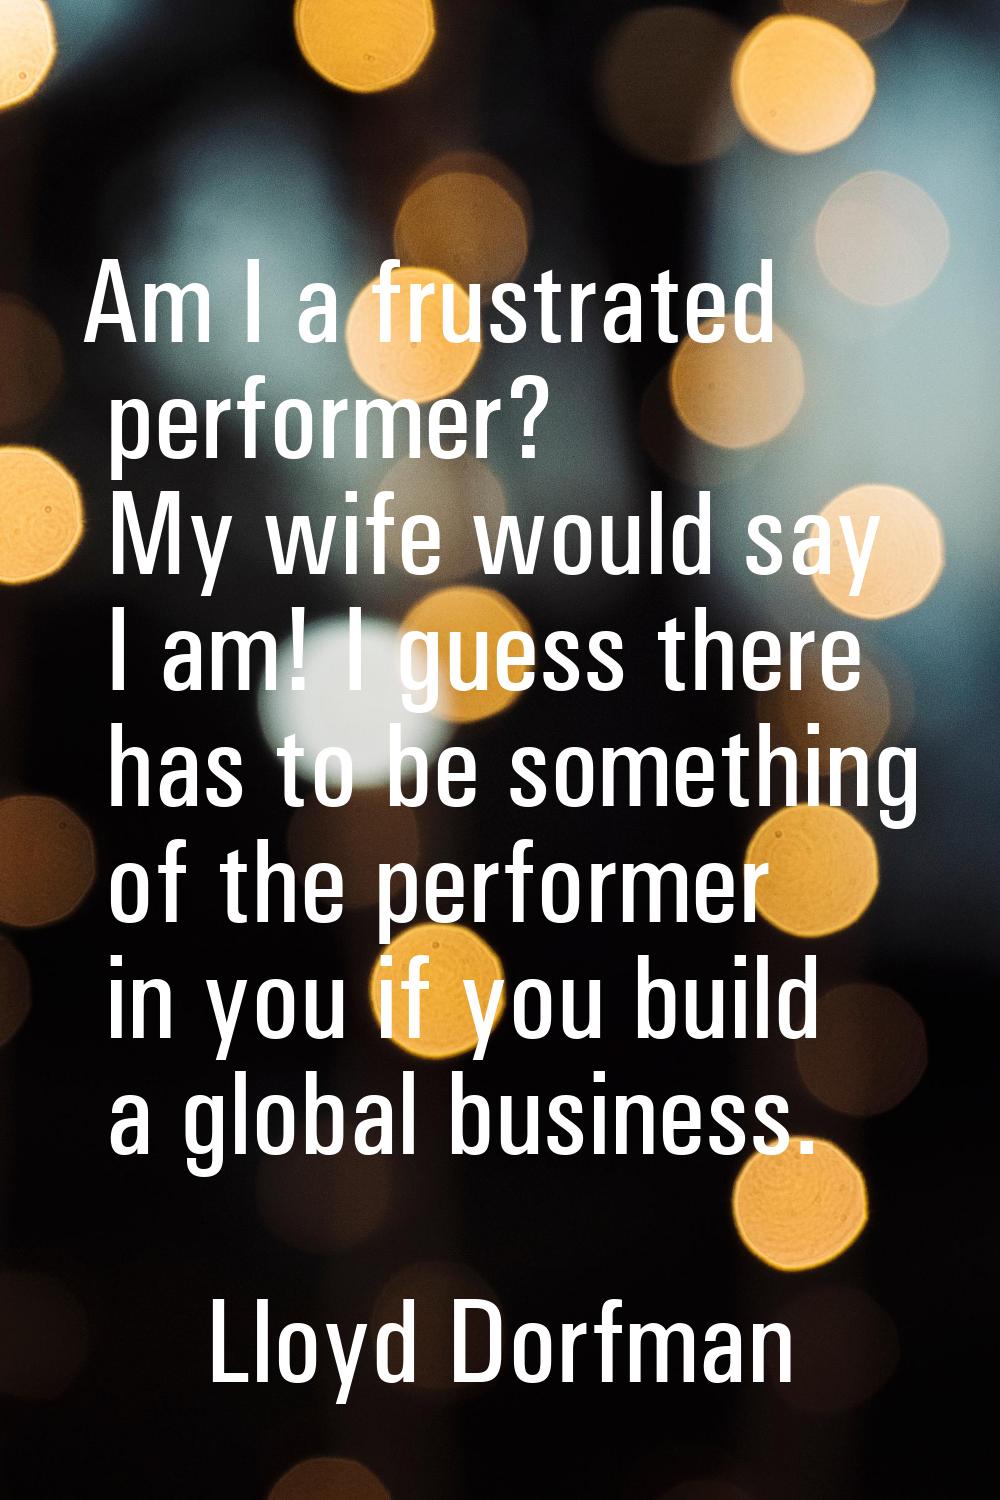 Am I a frustrated performer? My wife would say I am! I guess there has to be something of the perfo